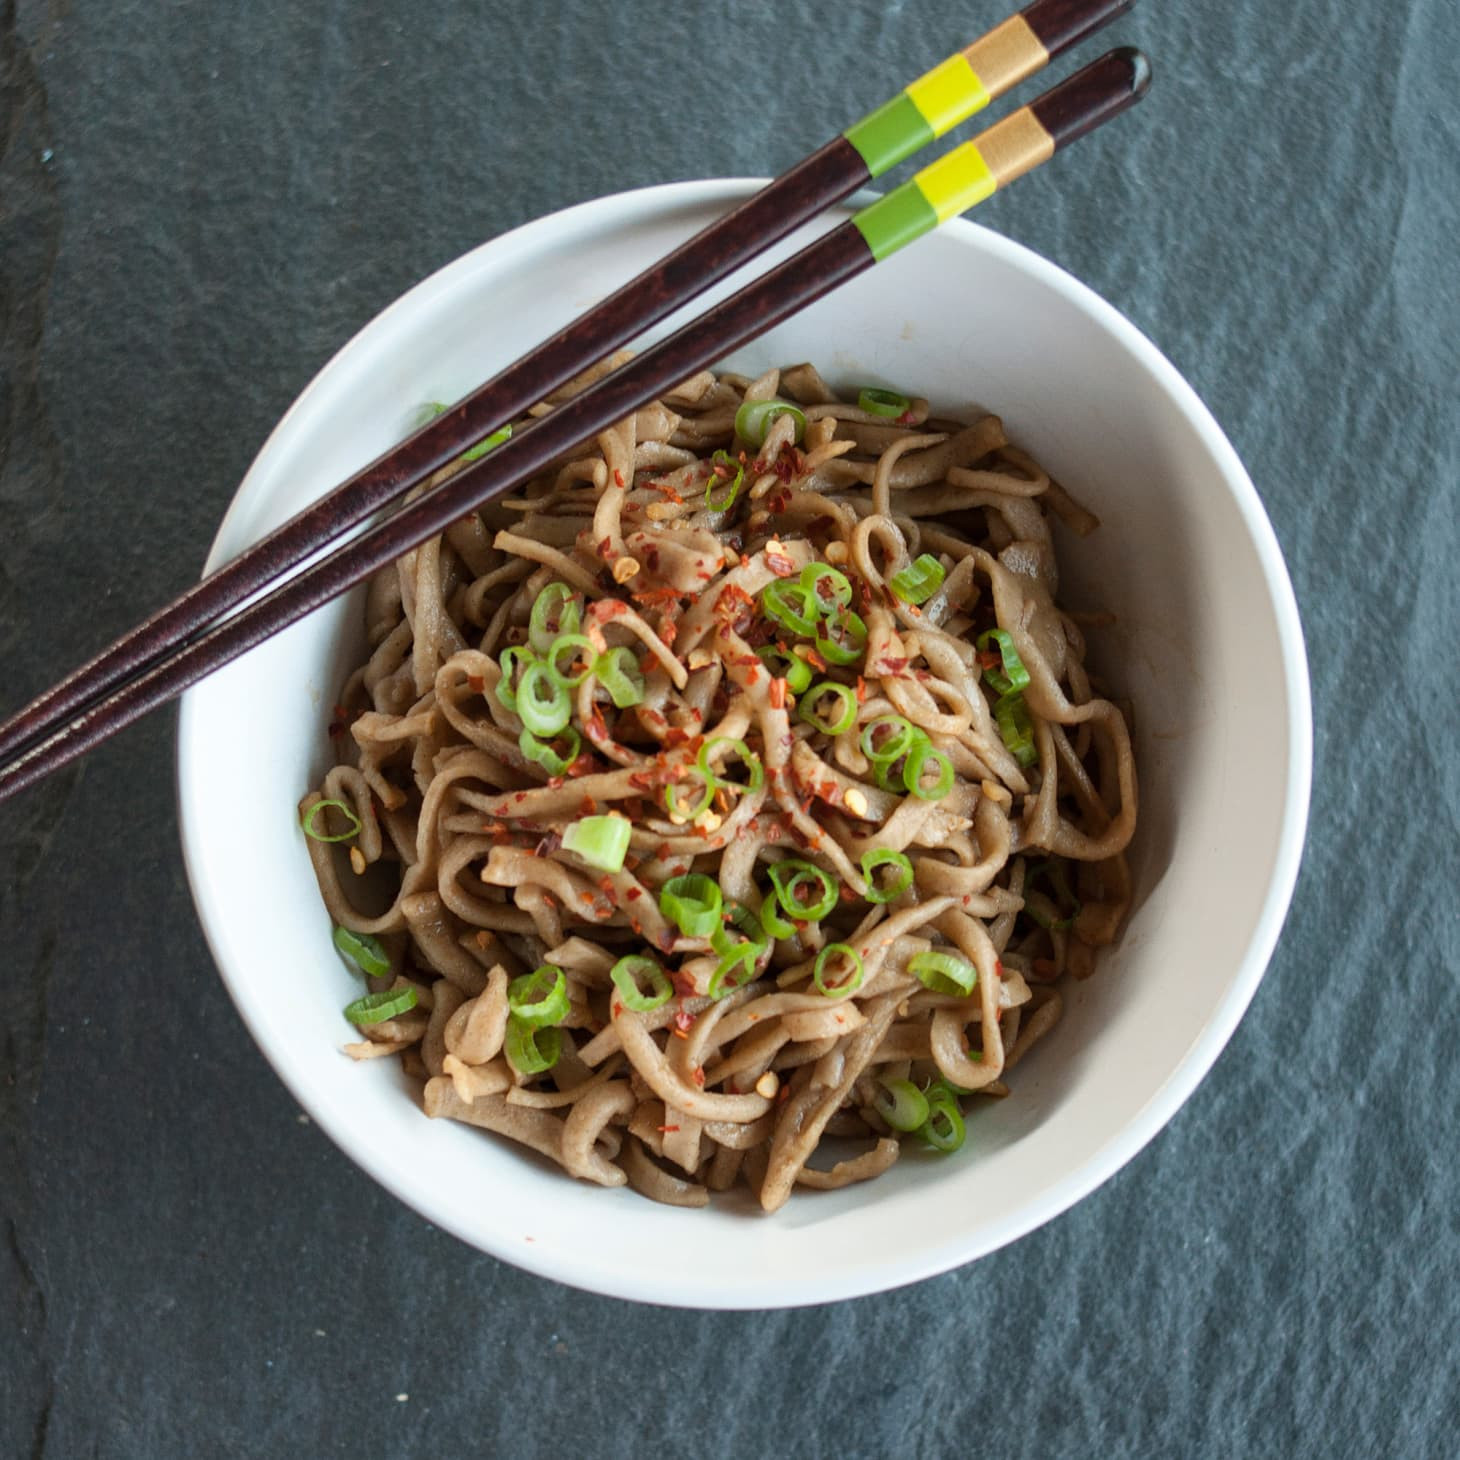 Buckwheat Soba Noodles
 How to Make Buckwheat Soba Noodles from Scratch